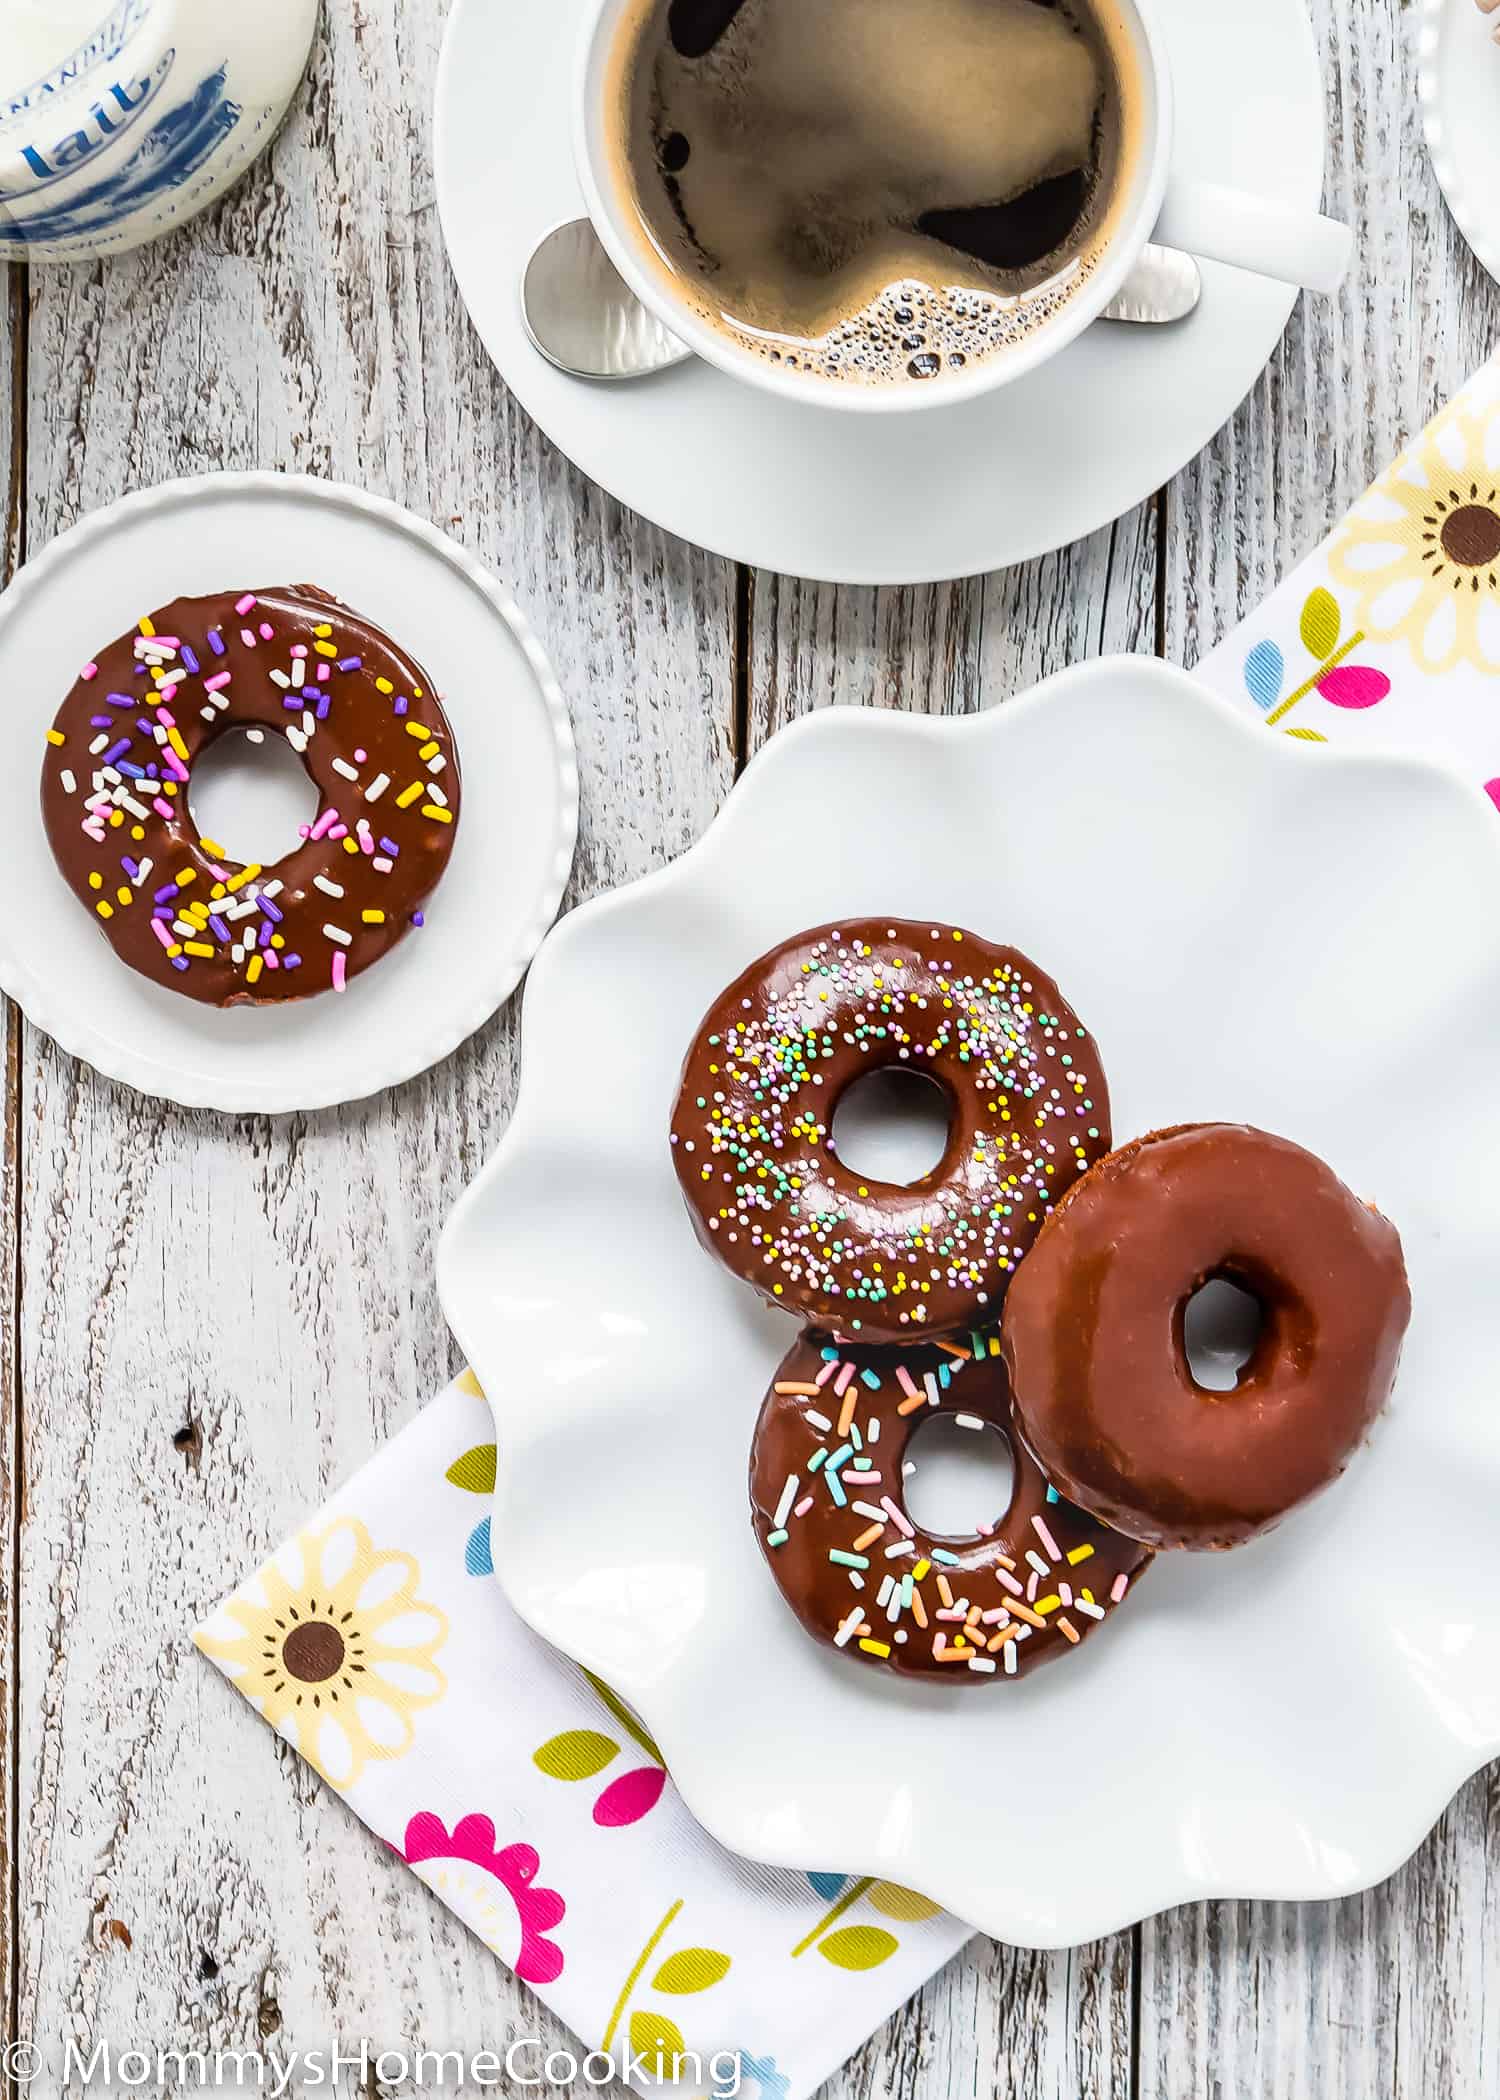 egg-free donuts in a plate with a cup of coffee on the side.